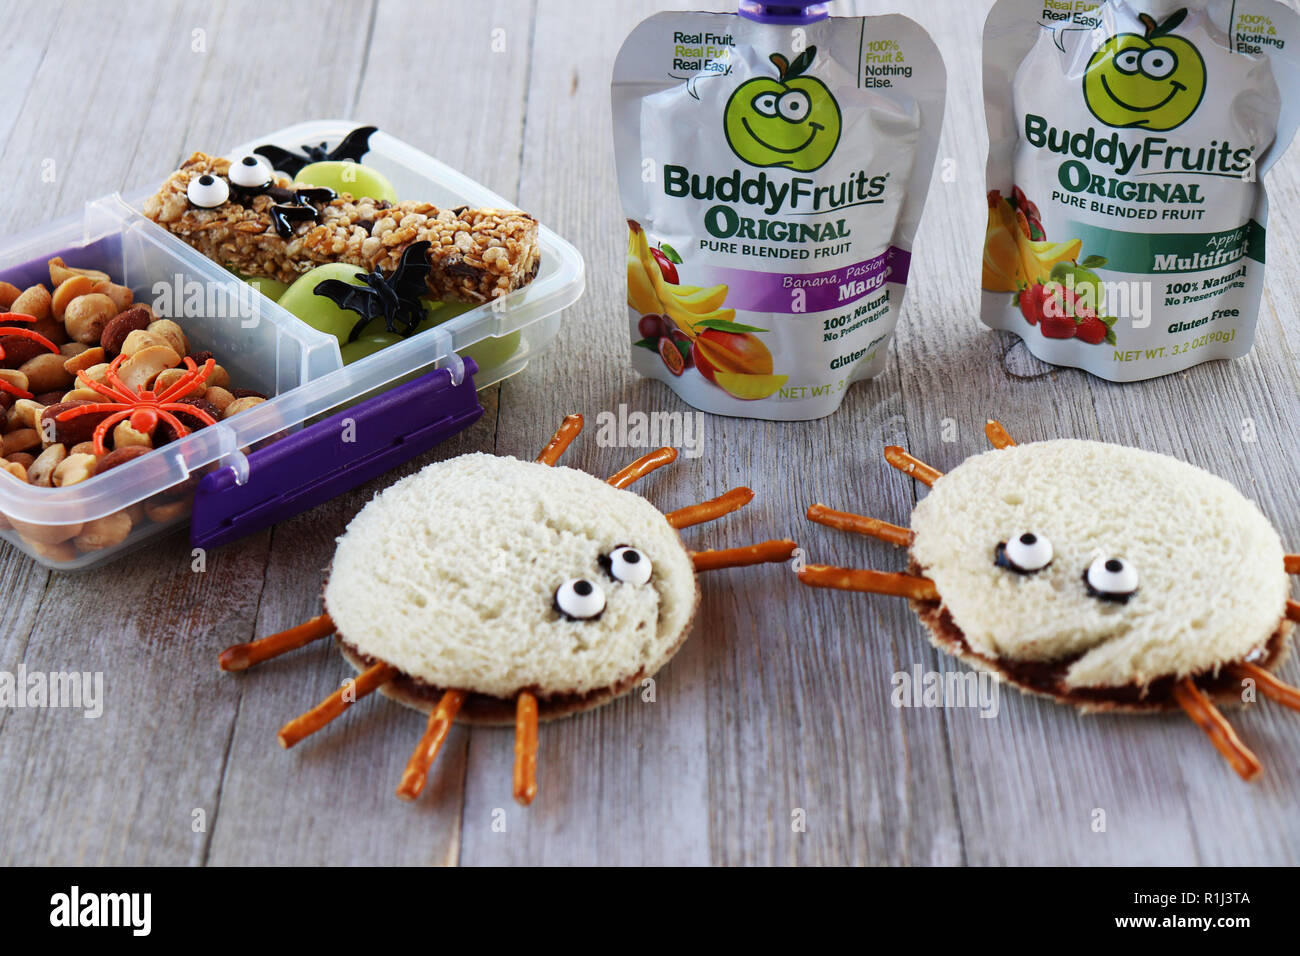 A spooky Halloween school lunch with Buddy Fruits Stock Photo